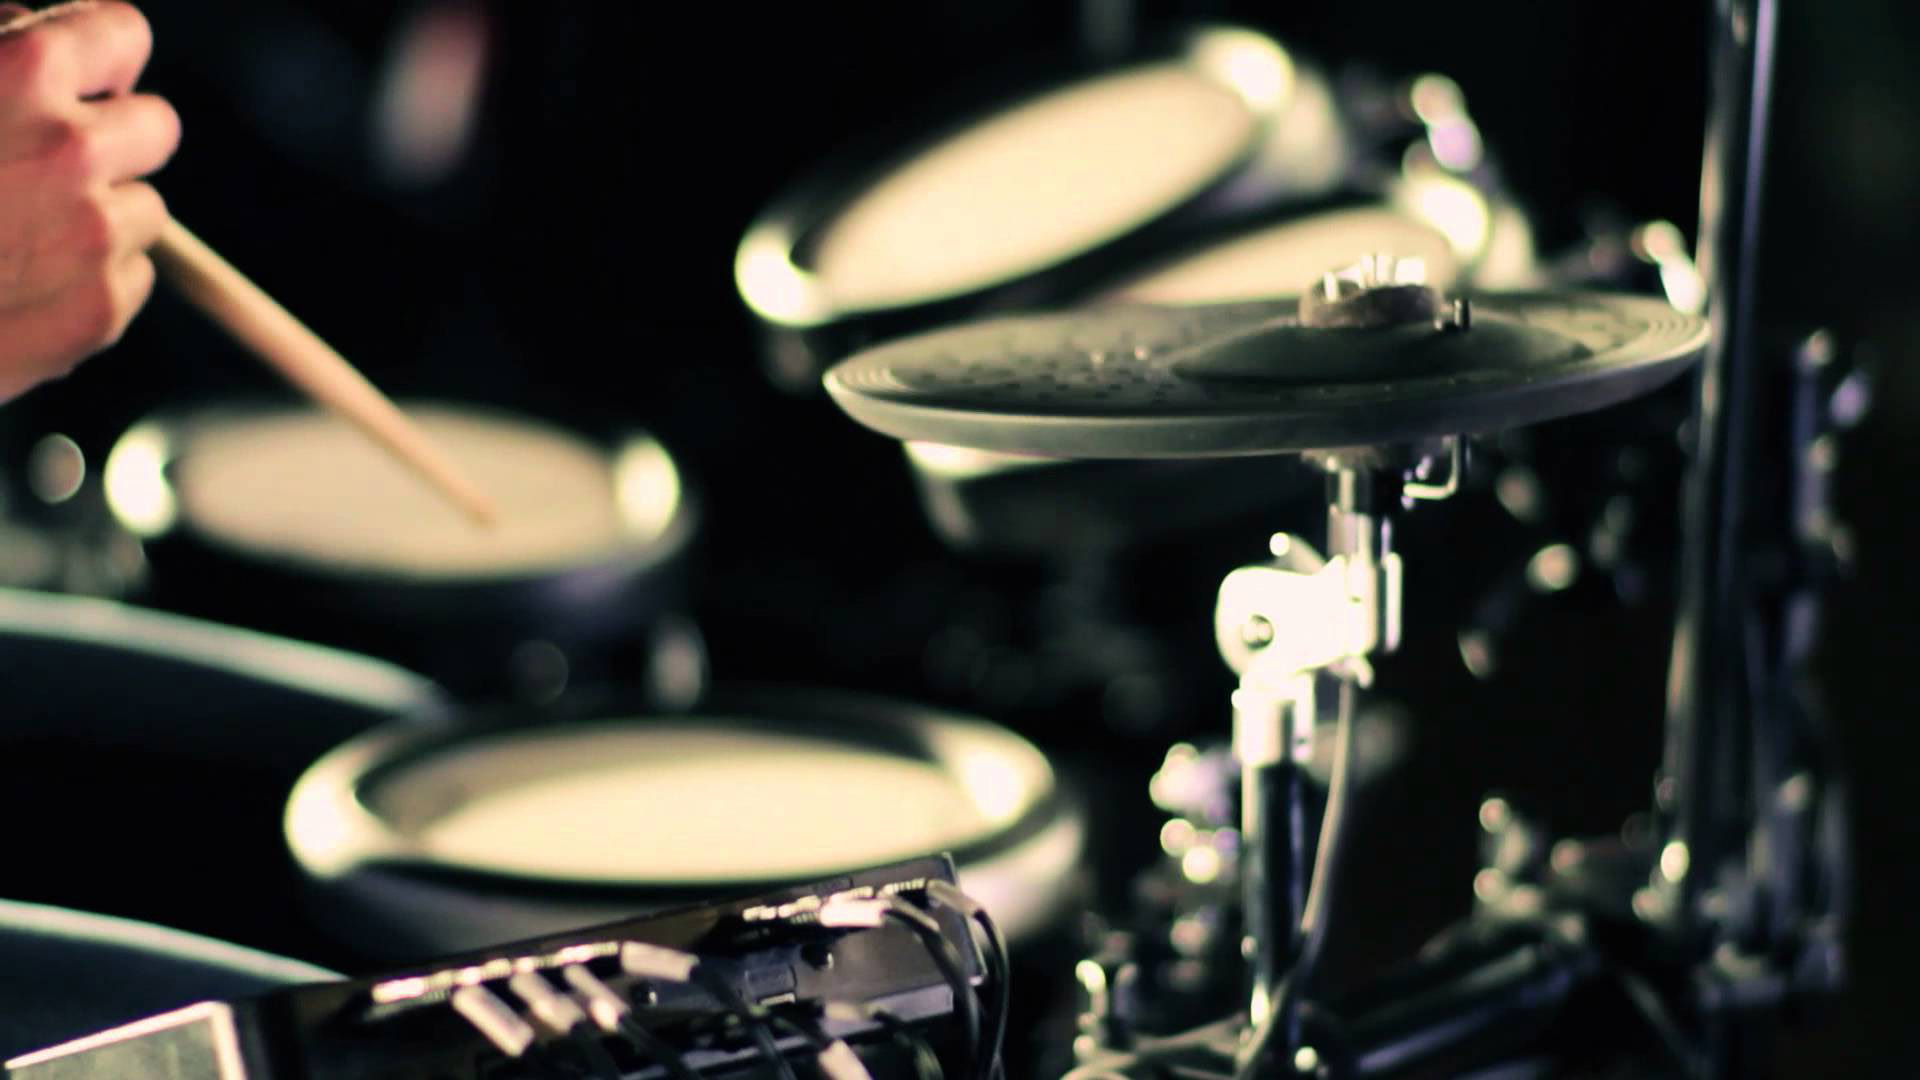 wallpaper pickywallpapers com,drum,drums,musical instrument,drumhead,percussion